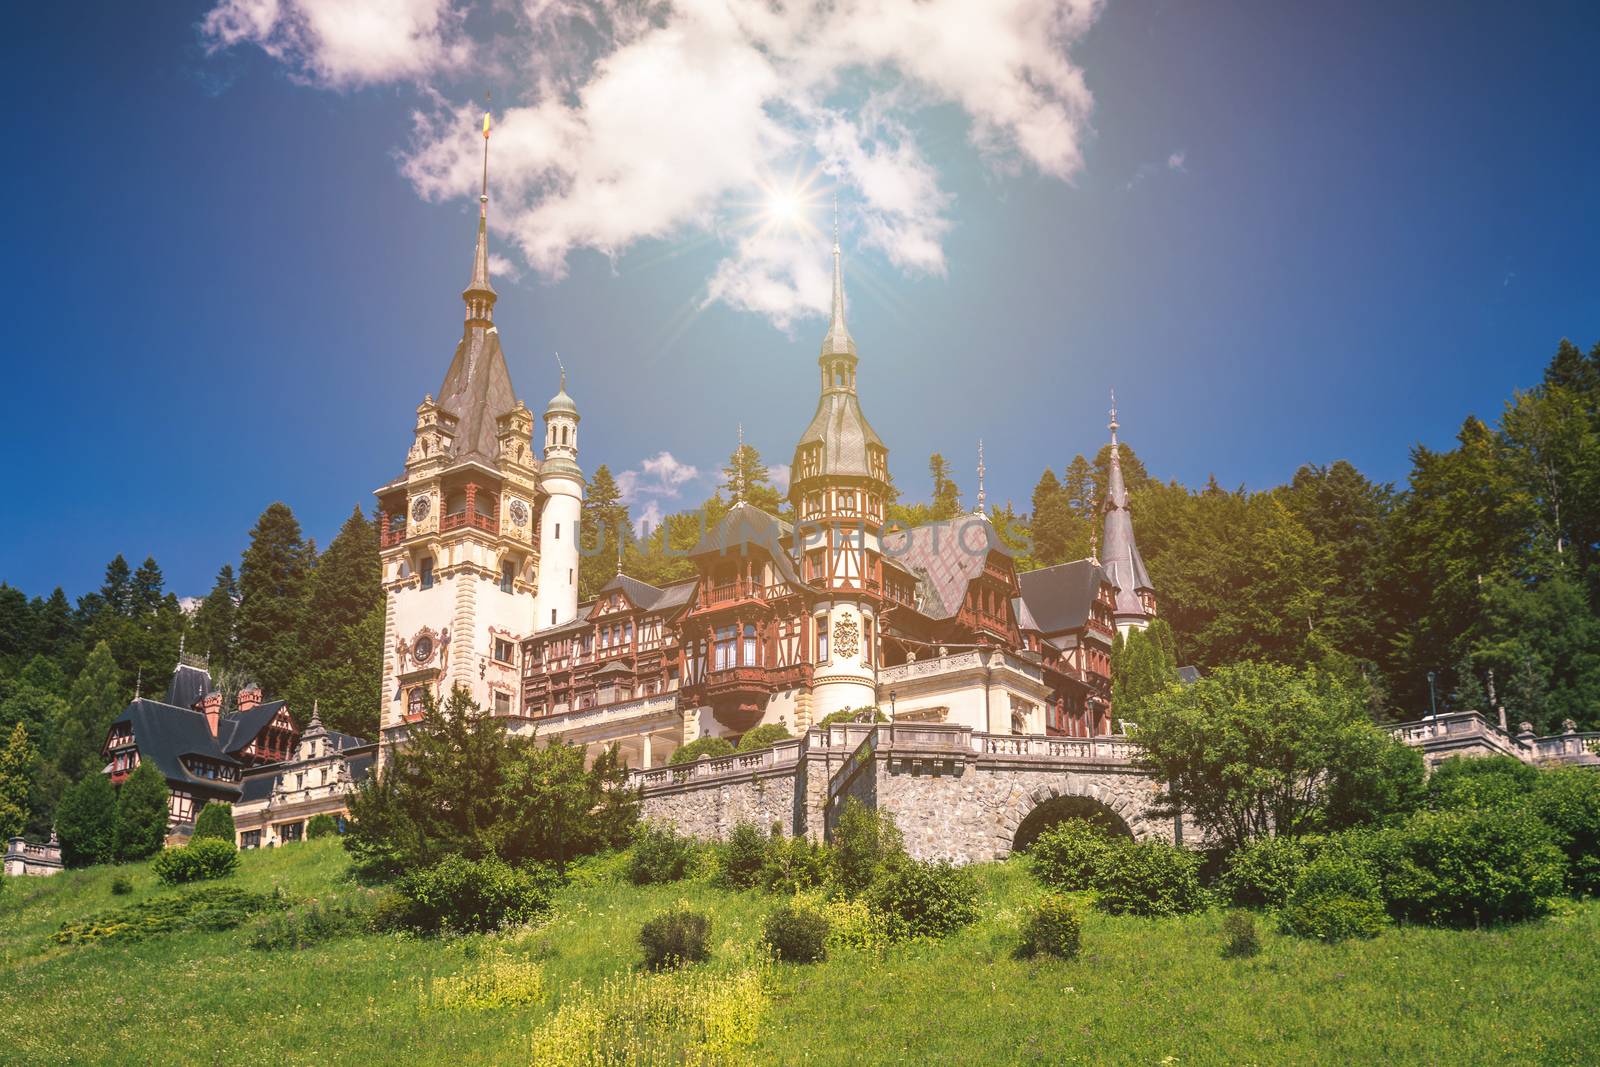 Peles castle, Sinaia, Romania. Given its historical and artistic value, Peles castle is one of the most important and beautiful monuments in Europe.